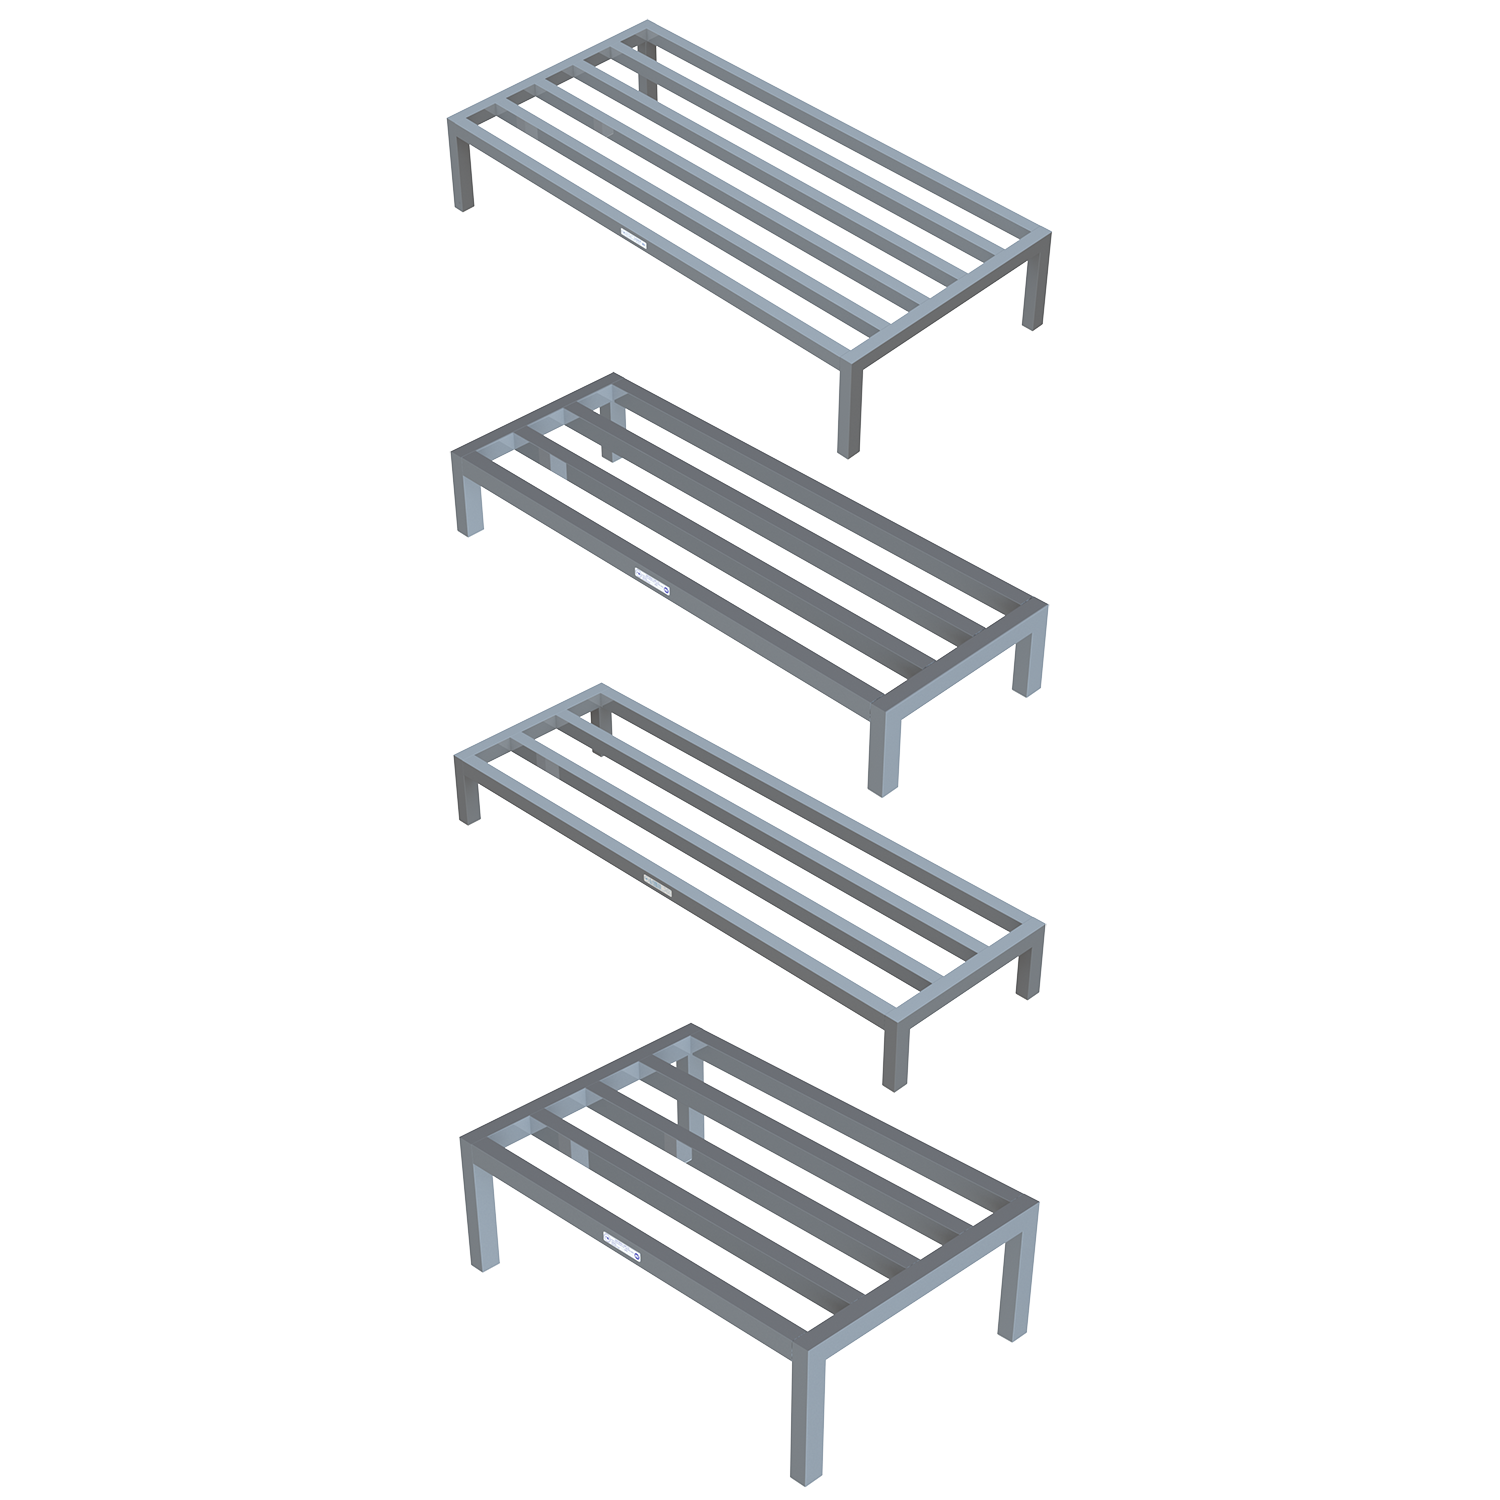 Dunnage Racks NSF certifiedProduct Storage Keywords: Secure product storage Elevated product storage Floor-free storage Airflow around products Package life optimization Cleaning-friendly storage Material and Construction Keywords: NSF-approved racks Sanitary aluminum storage All-welded construction Heavy-duty tube racks Rustproof storage solution Lightweight product racks Stability and Sturdiness Keywords: Stable storage solution Sturdy product racks Wide base storage Reliable product support Durable storage design Maintenance and Cleaning Keywords: Easy maintenance storage Hygienic storage solution Cleaning-friendly racks Rust-resistant storage Long-lasting cleanliness NSF Compliance Keywords: NSF standards storage NSF-approved product racks Food safety compliant storage Quality assurance in storage Sanitary storage solution General Keywords: Durable product racks Long-lasting storage solution Lightweight storage design Optimal package life Efficient airflow storage